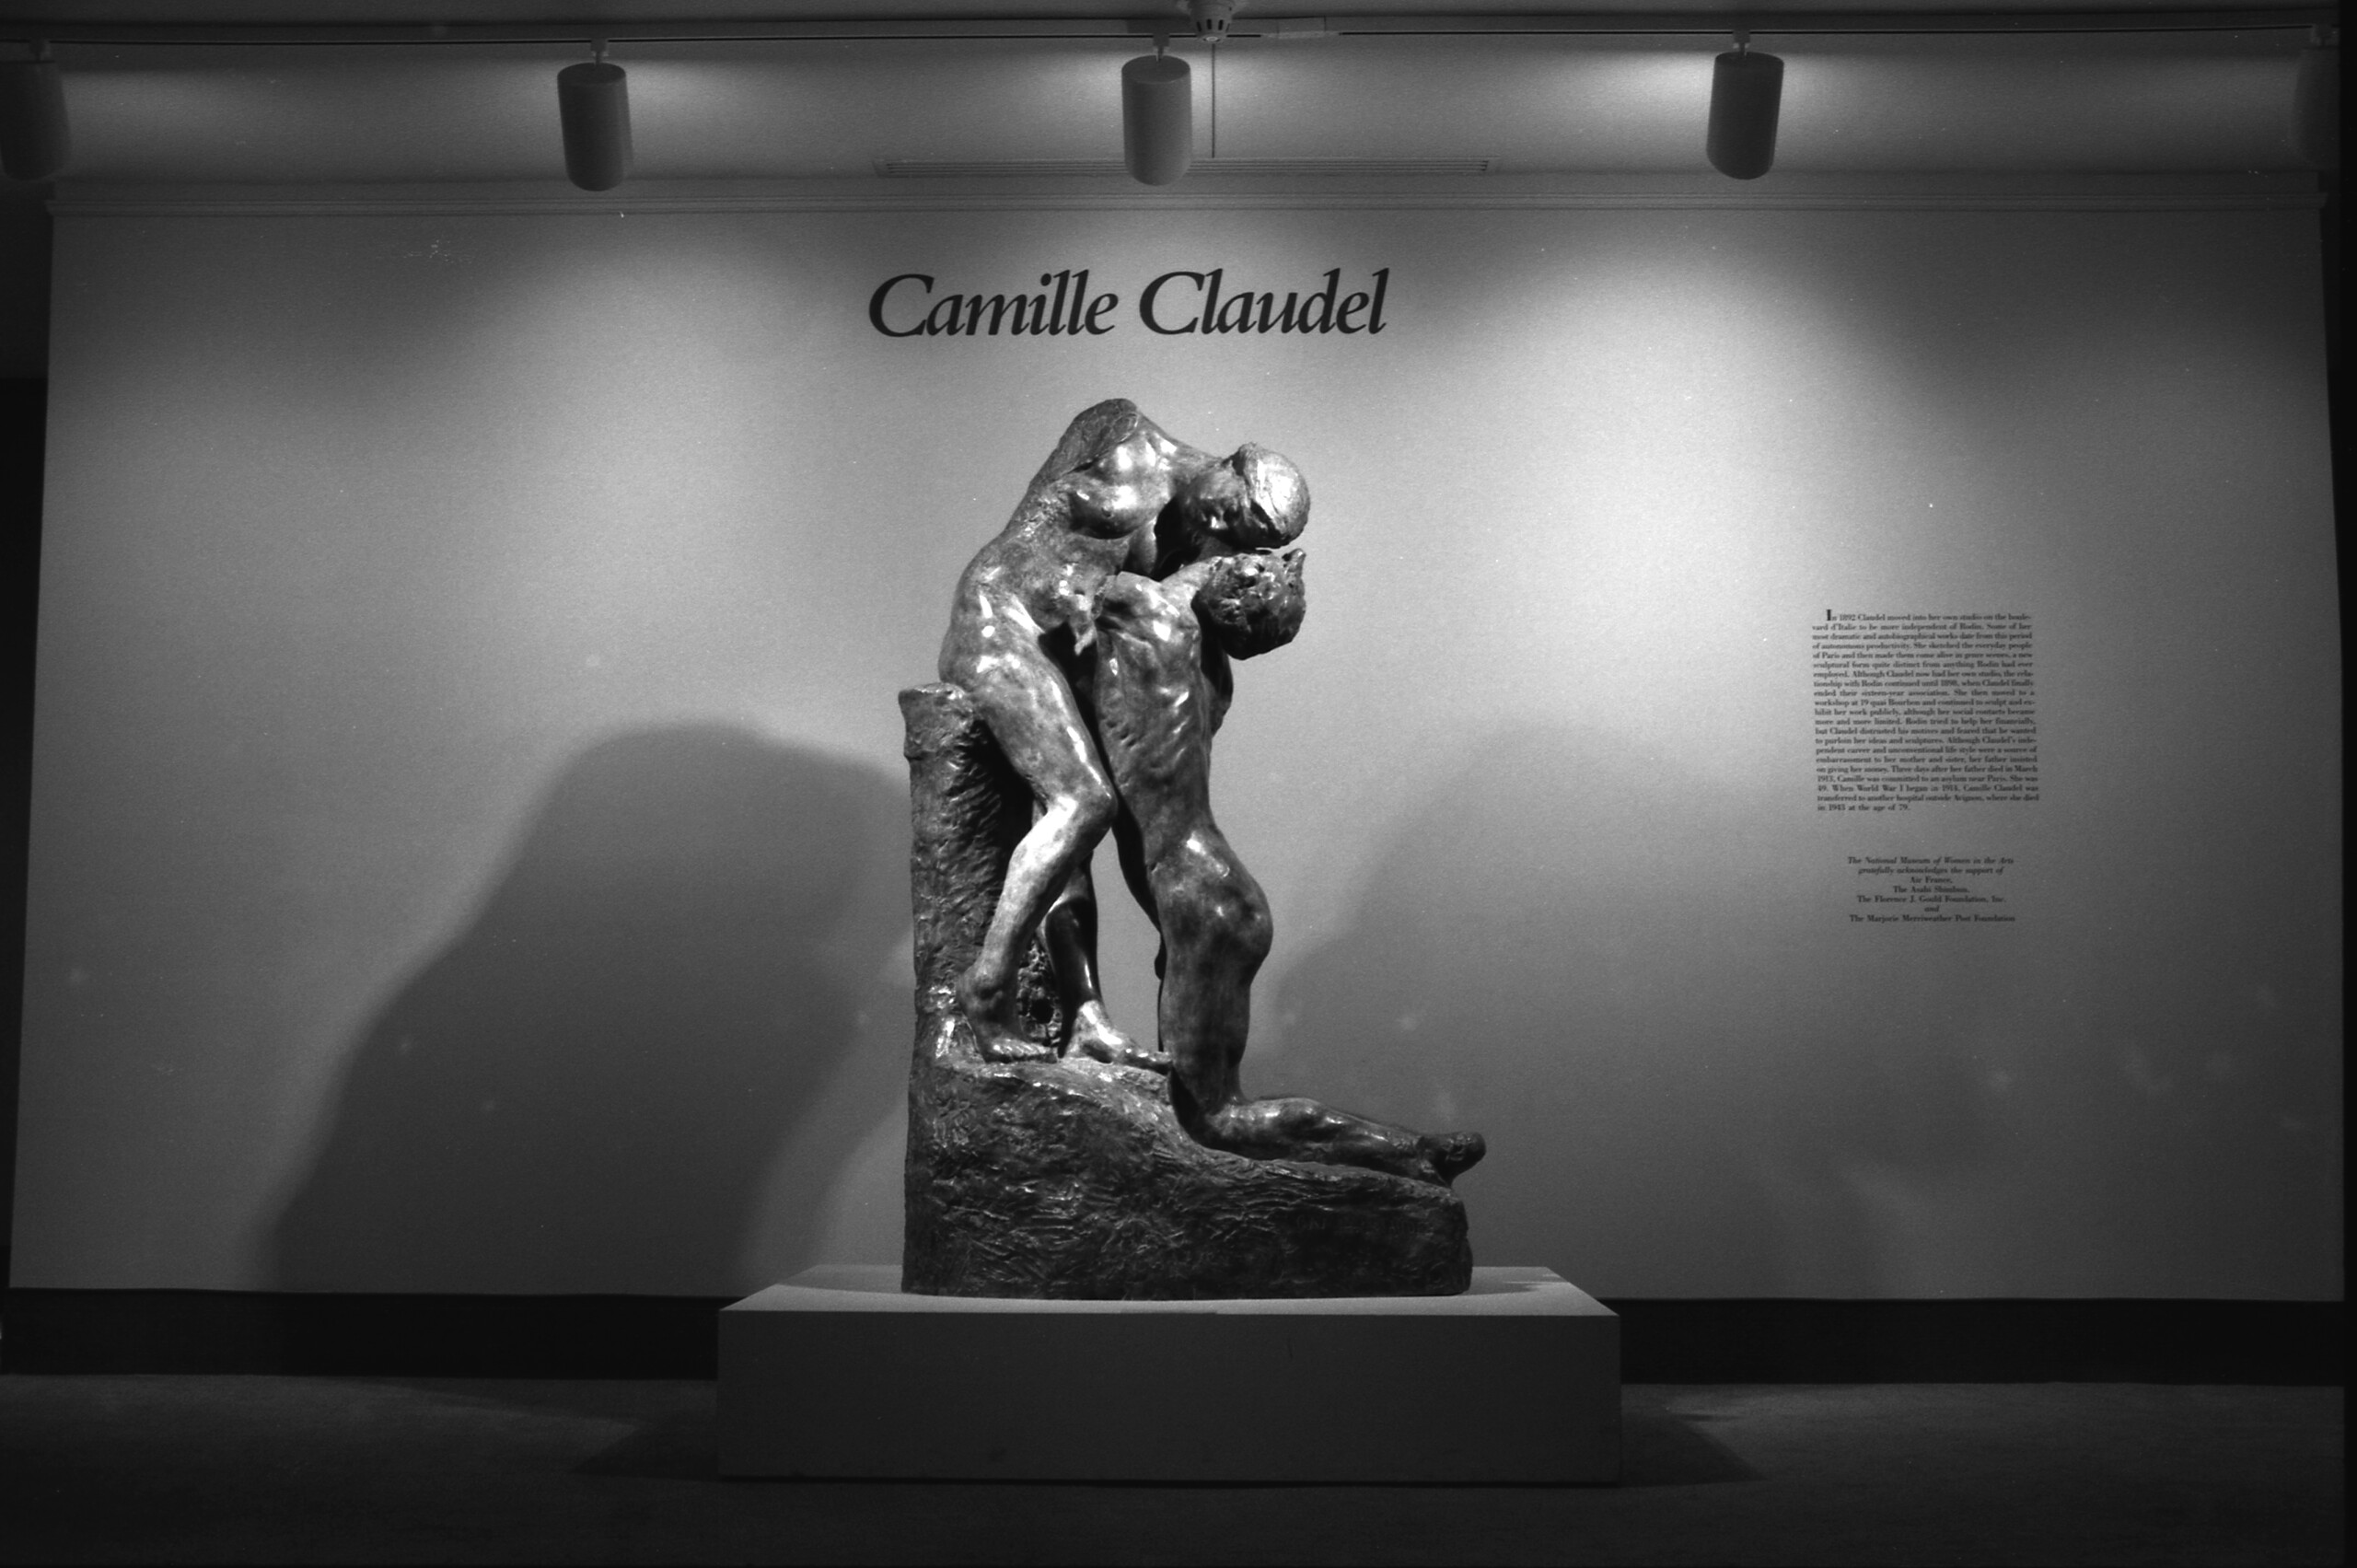 A view of a gallery space. Two sculptures of a man and a woman are placed on a pedestal. The woman is leaning down to the man, who is on his knees, and kissing him. Above the sculptures, it says 